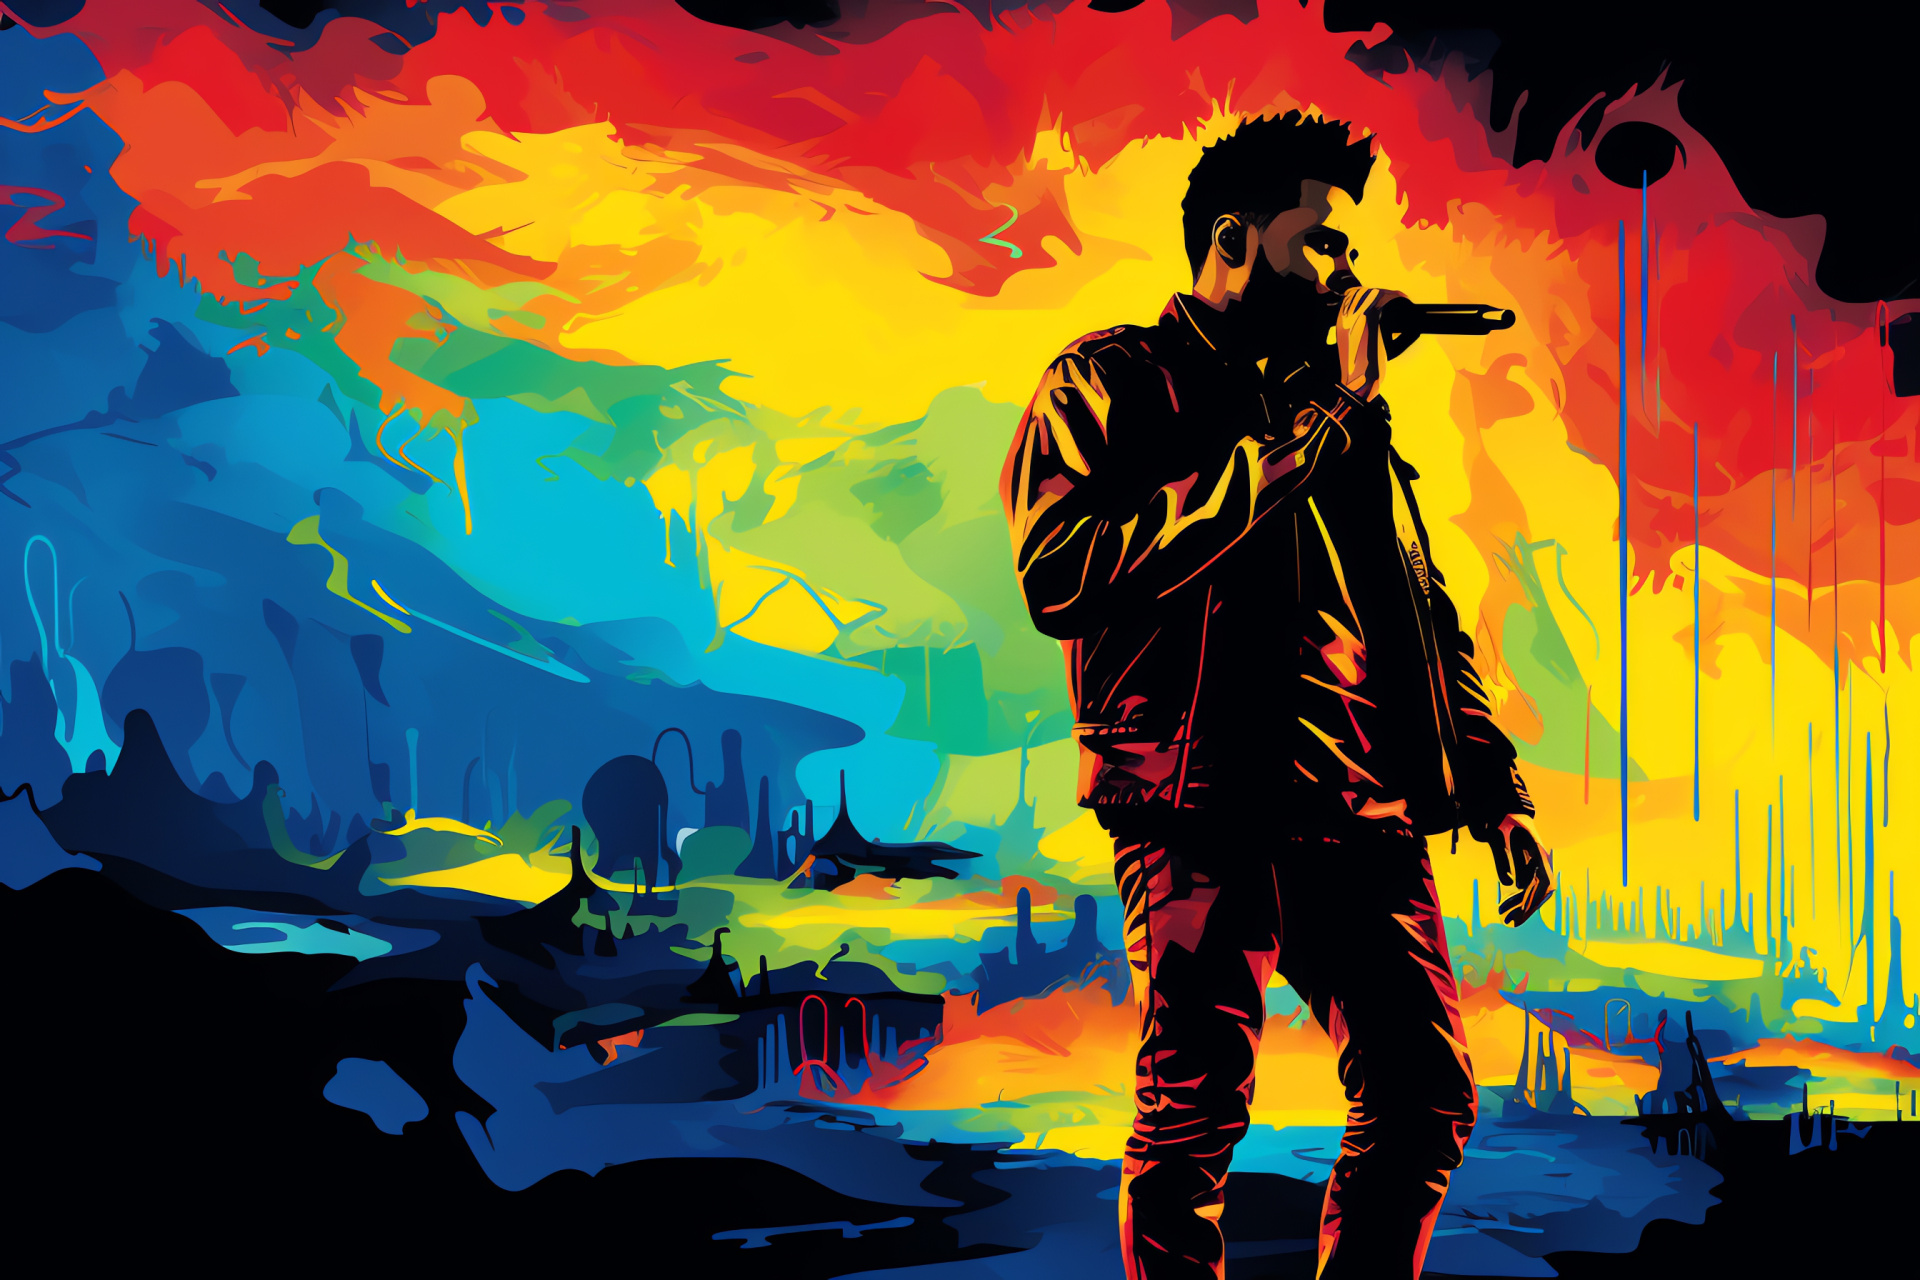 Entertainer The Weeknd, Signature coif, Artistic palette, Visual intensity, Emotional expression, HD Desktop Wallpaper